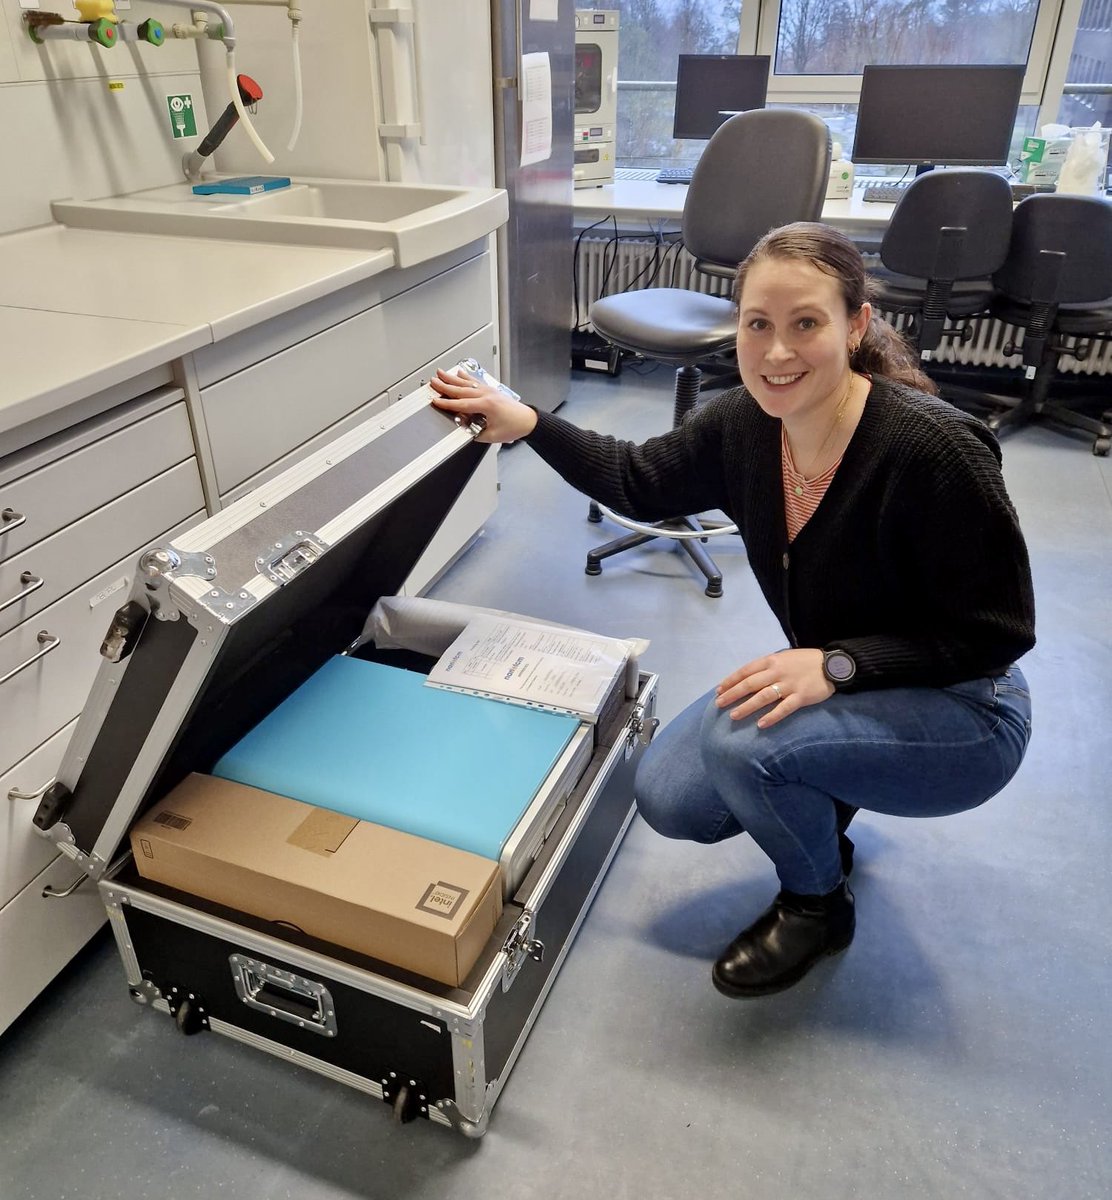 Our #nanoanalyzer arrived just in time for #christmas 🎁 looking forward to new #exofun next year! @nanofcm  #extracellularvesicles